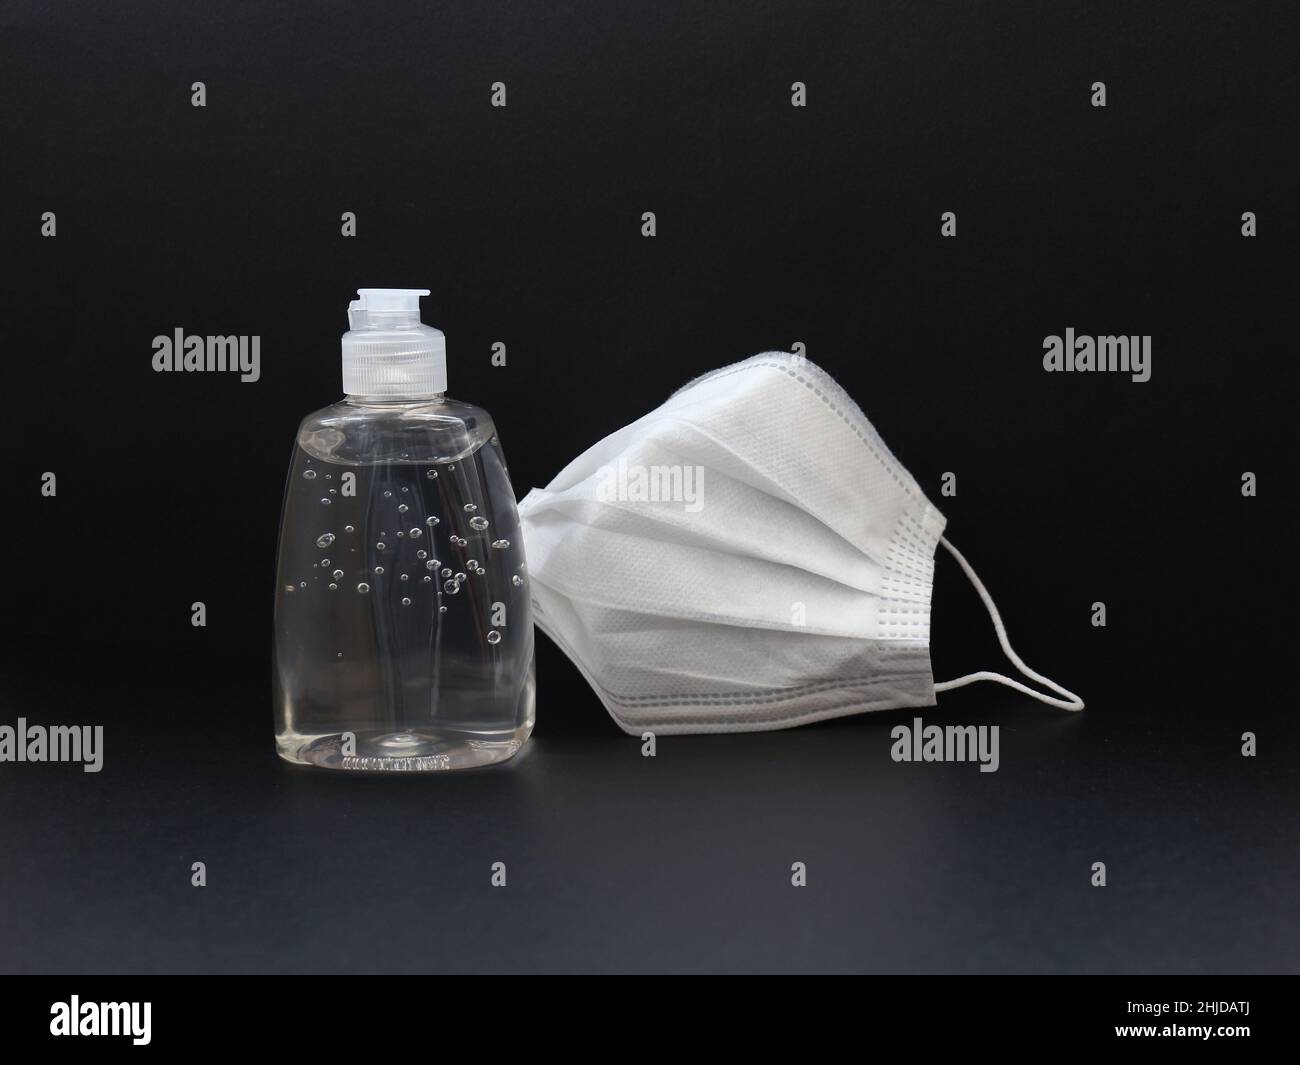 basic protective kit for covid19 pandemic, hand sanitizer gel in a transparent bottle and a white mask standing the closed bottle on black background Stock Photo